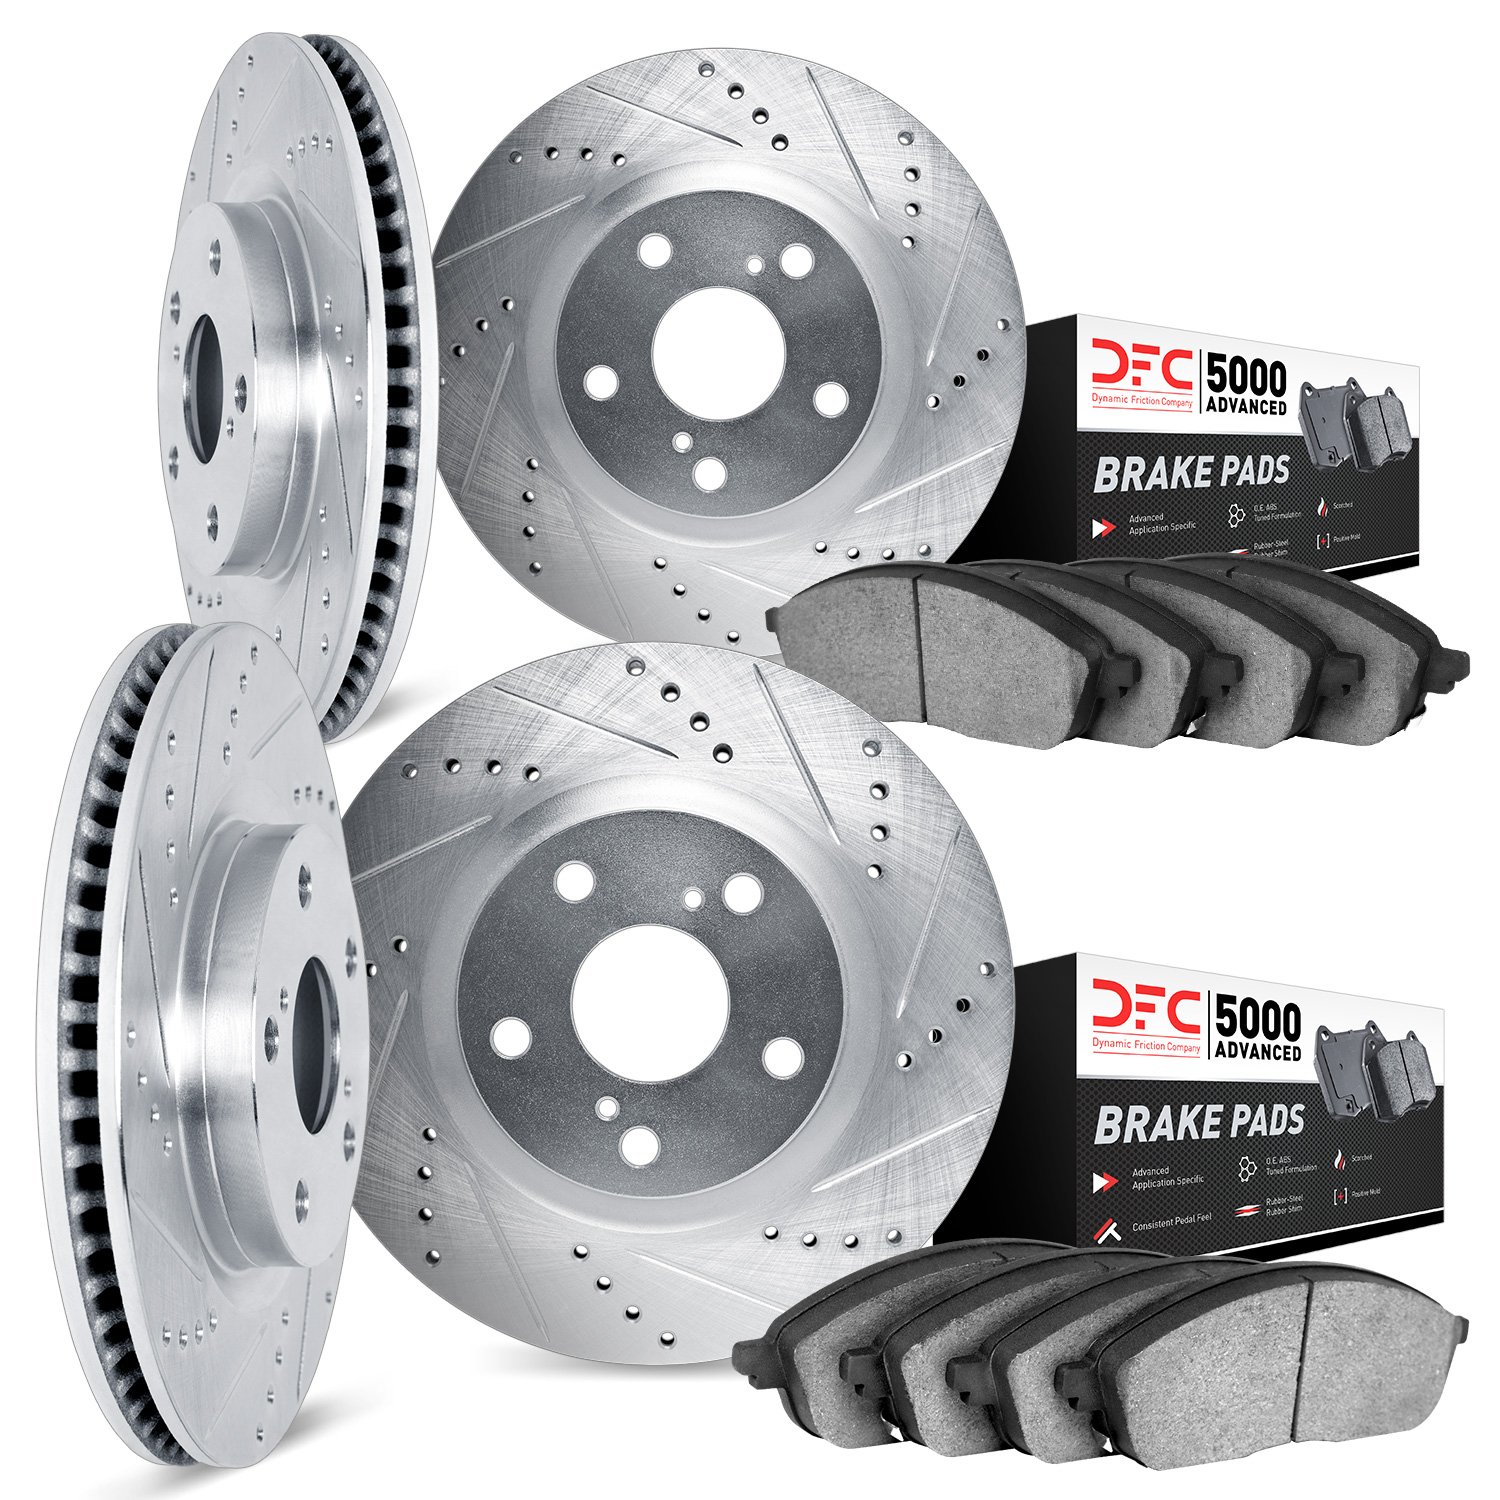 7504-13023 Drilled/Slotted Brake Rotors w/5000 Advanced Brake Pads Kit [Silver], Fits Select Subaru, Position: Front and Rear